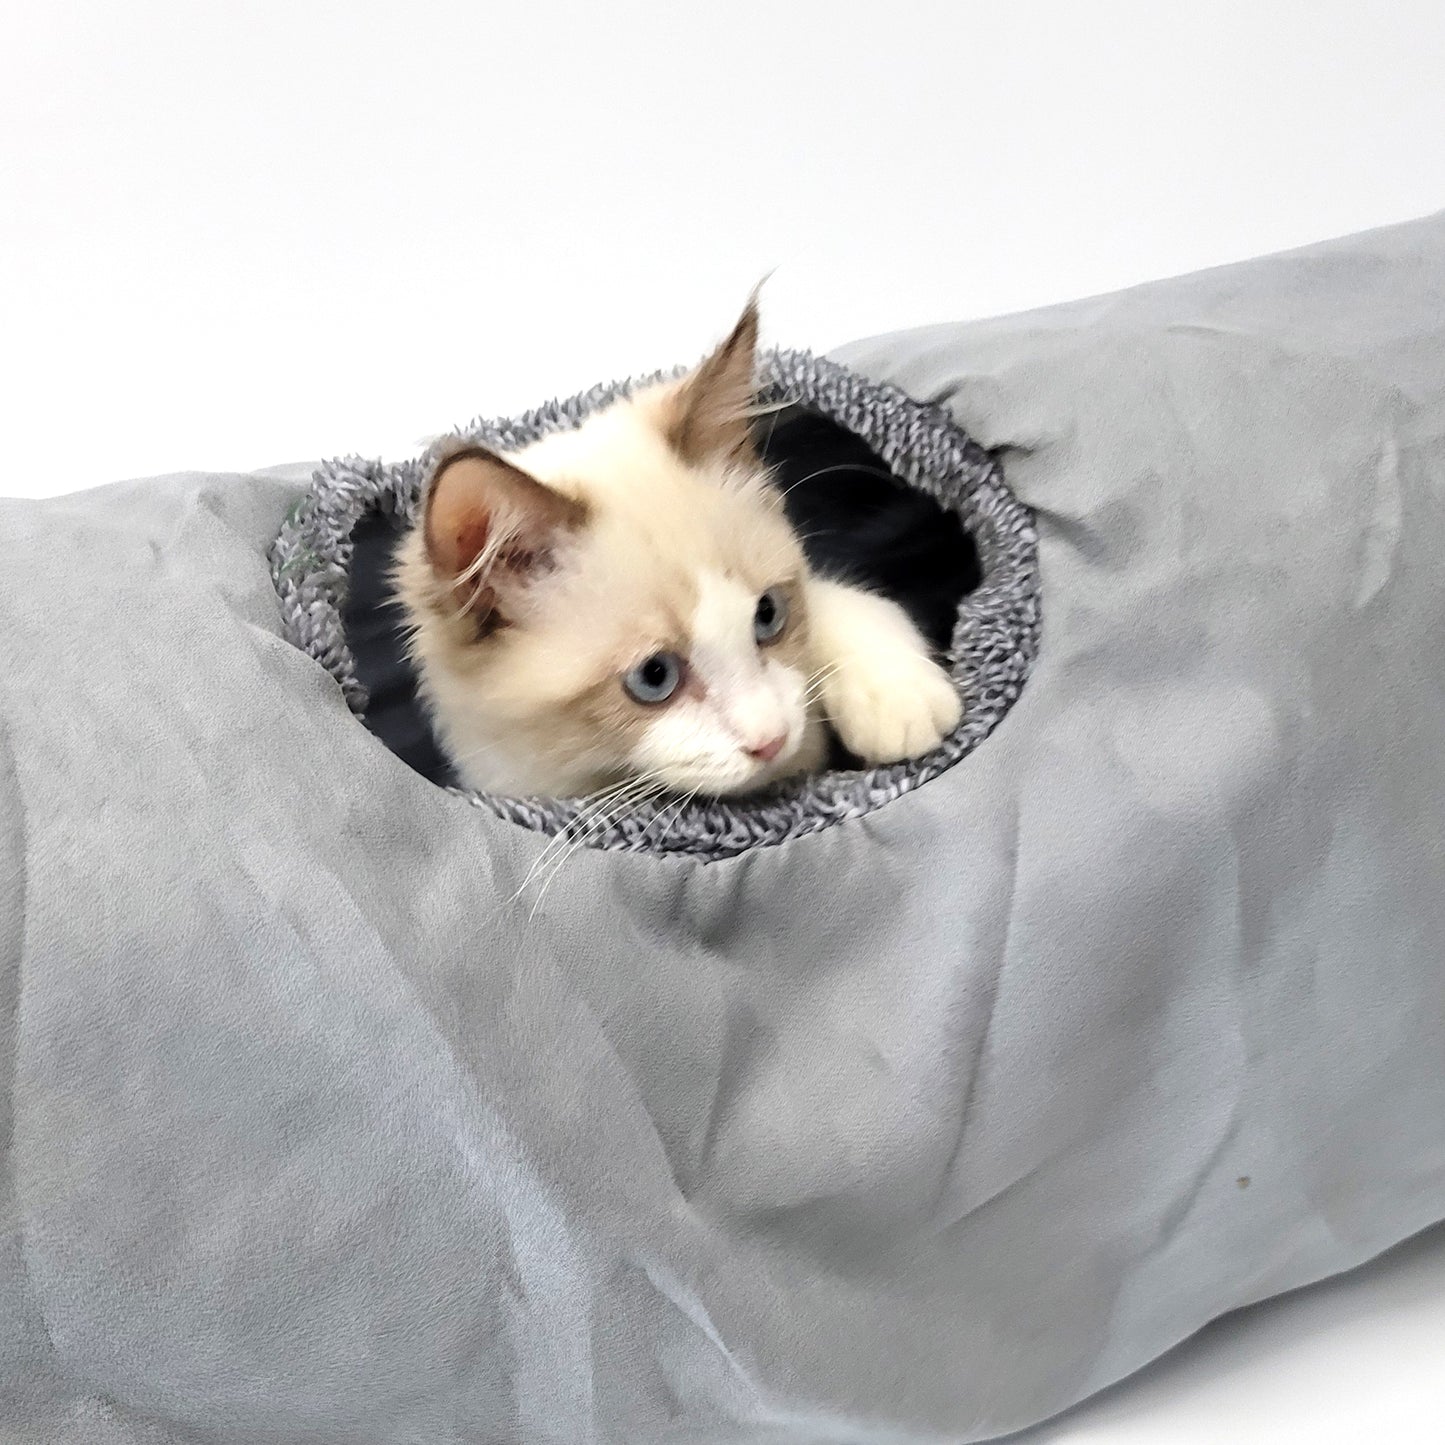 12" dia. Collapsible Crinkle Cat Play Tunnel with Hanging Toy Ball